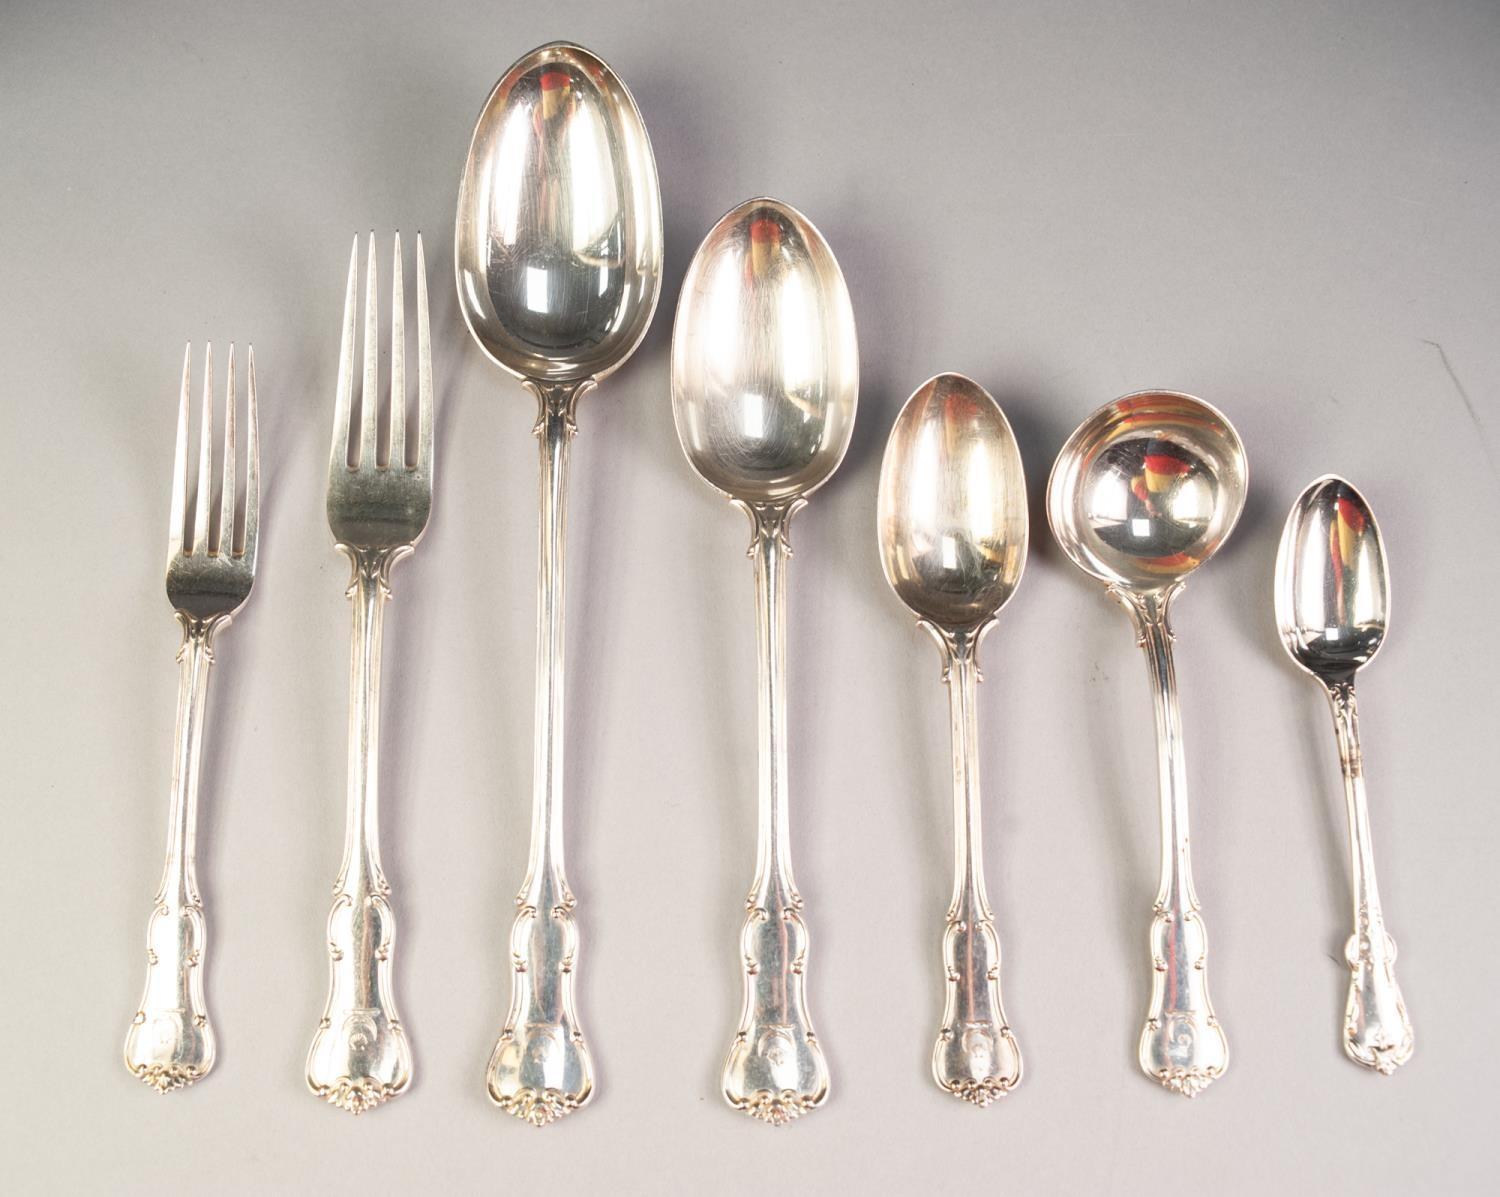 LATE VICTORIAN 52 PIECE SILVER QUEENS PATTERN TABLE SERVICE each engraved with a crest, comprising